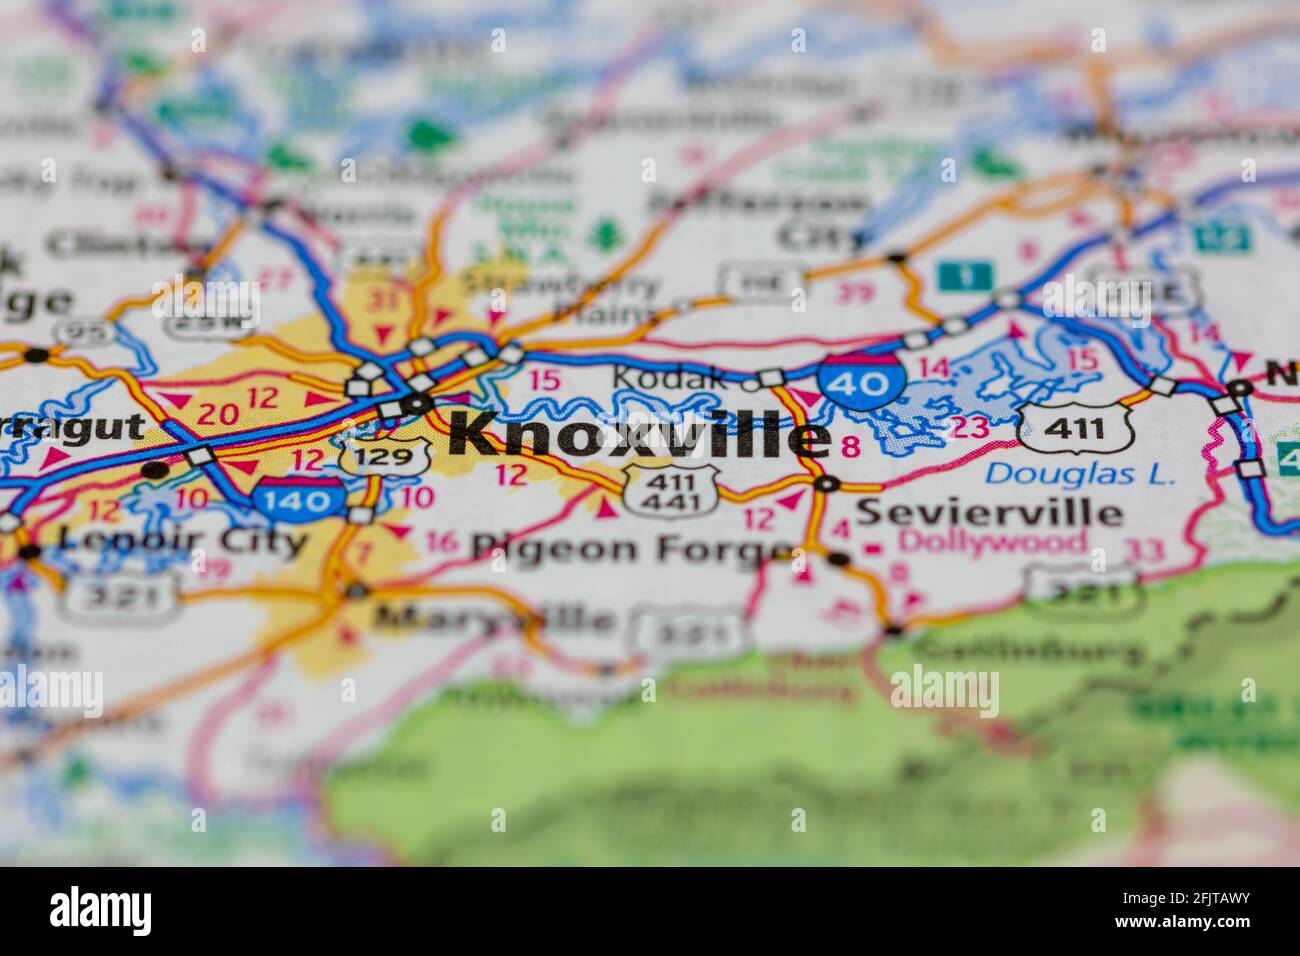 Knoxville tennessee USA and surrounding areas Shown on a road map or Geography map Stock Photo